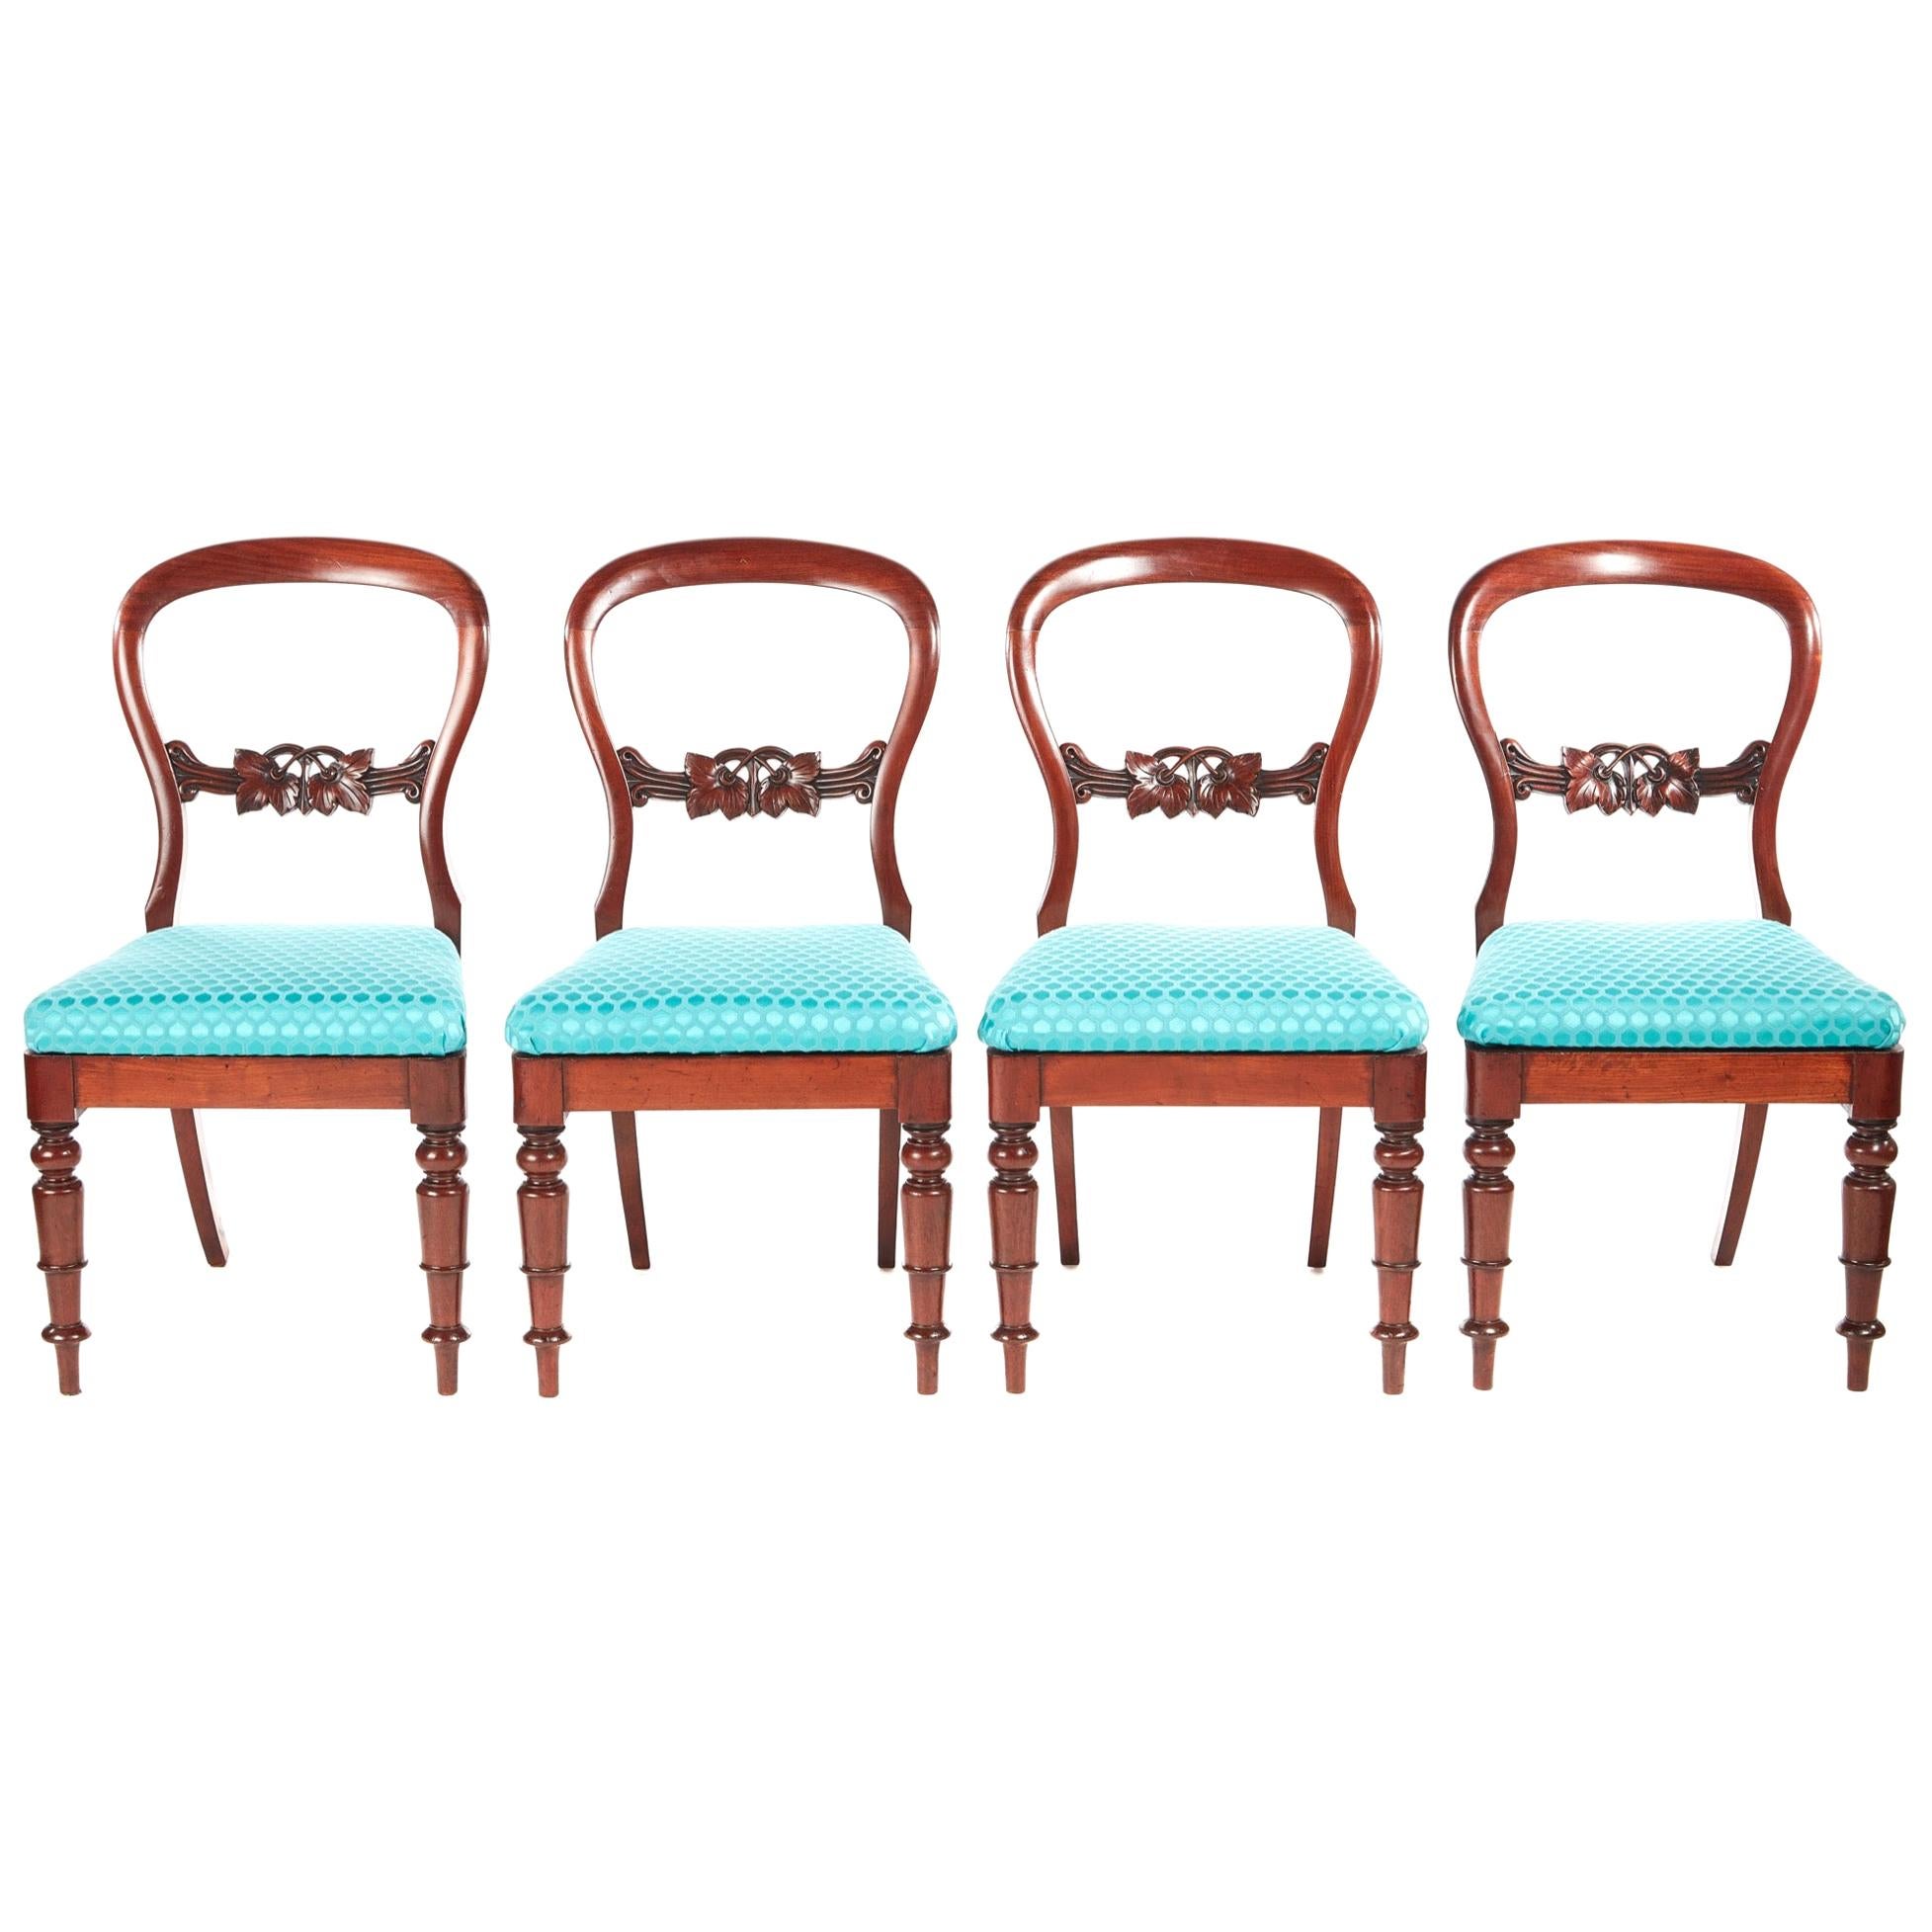 19th Century Antique Set of Four Victorian Mahogany Balloon Back Dining Chairs